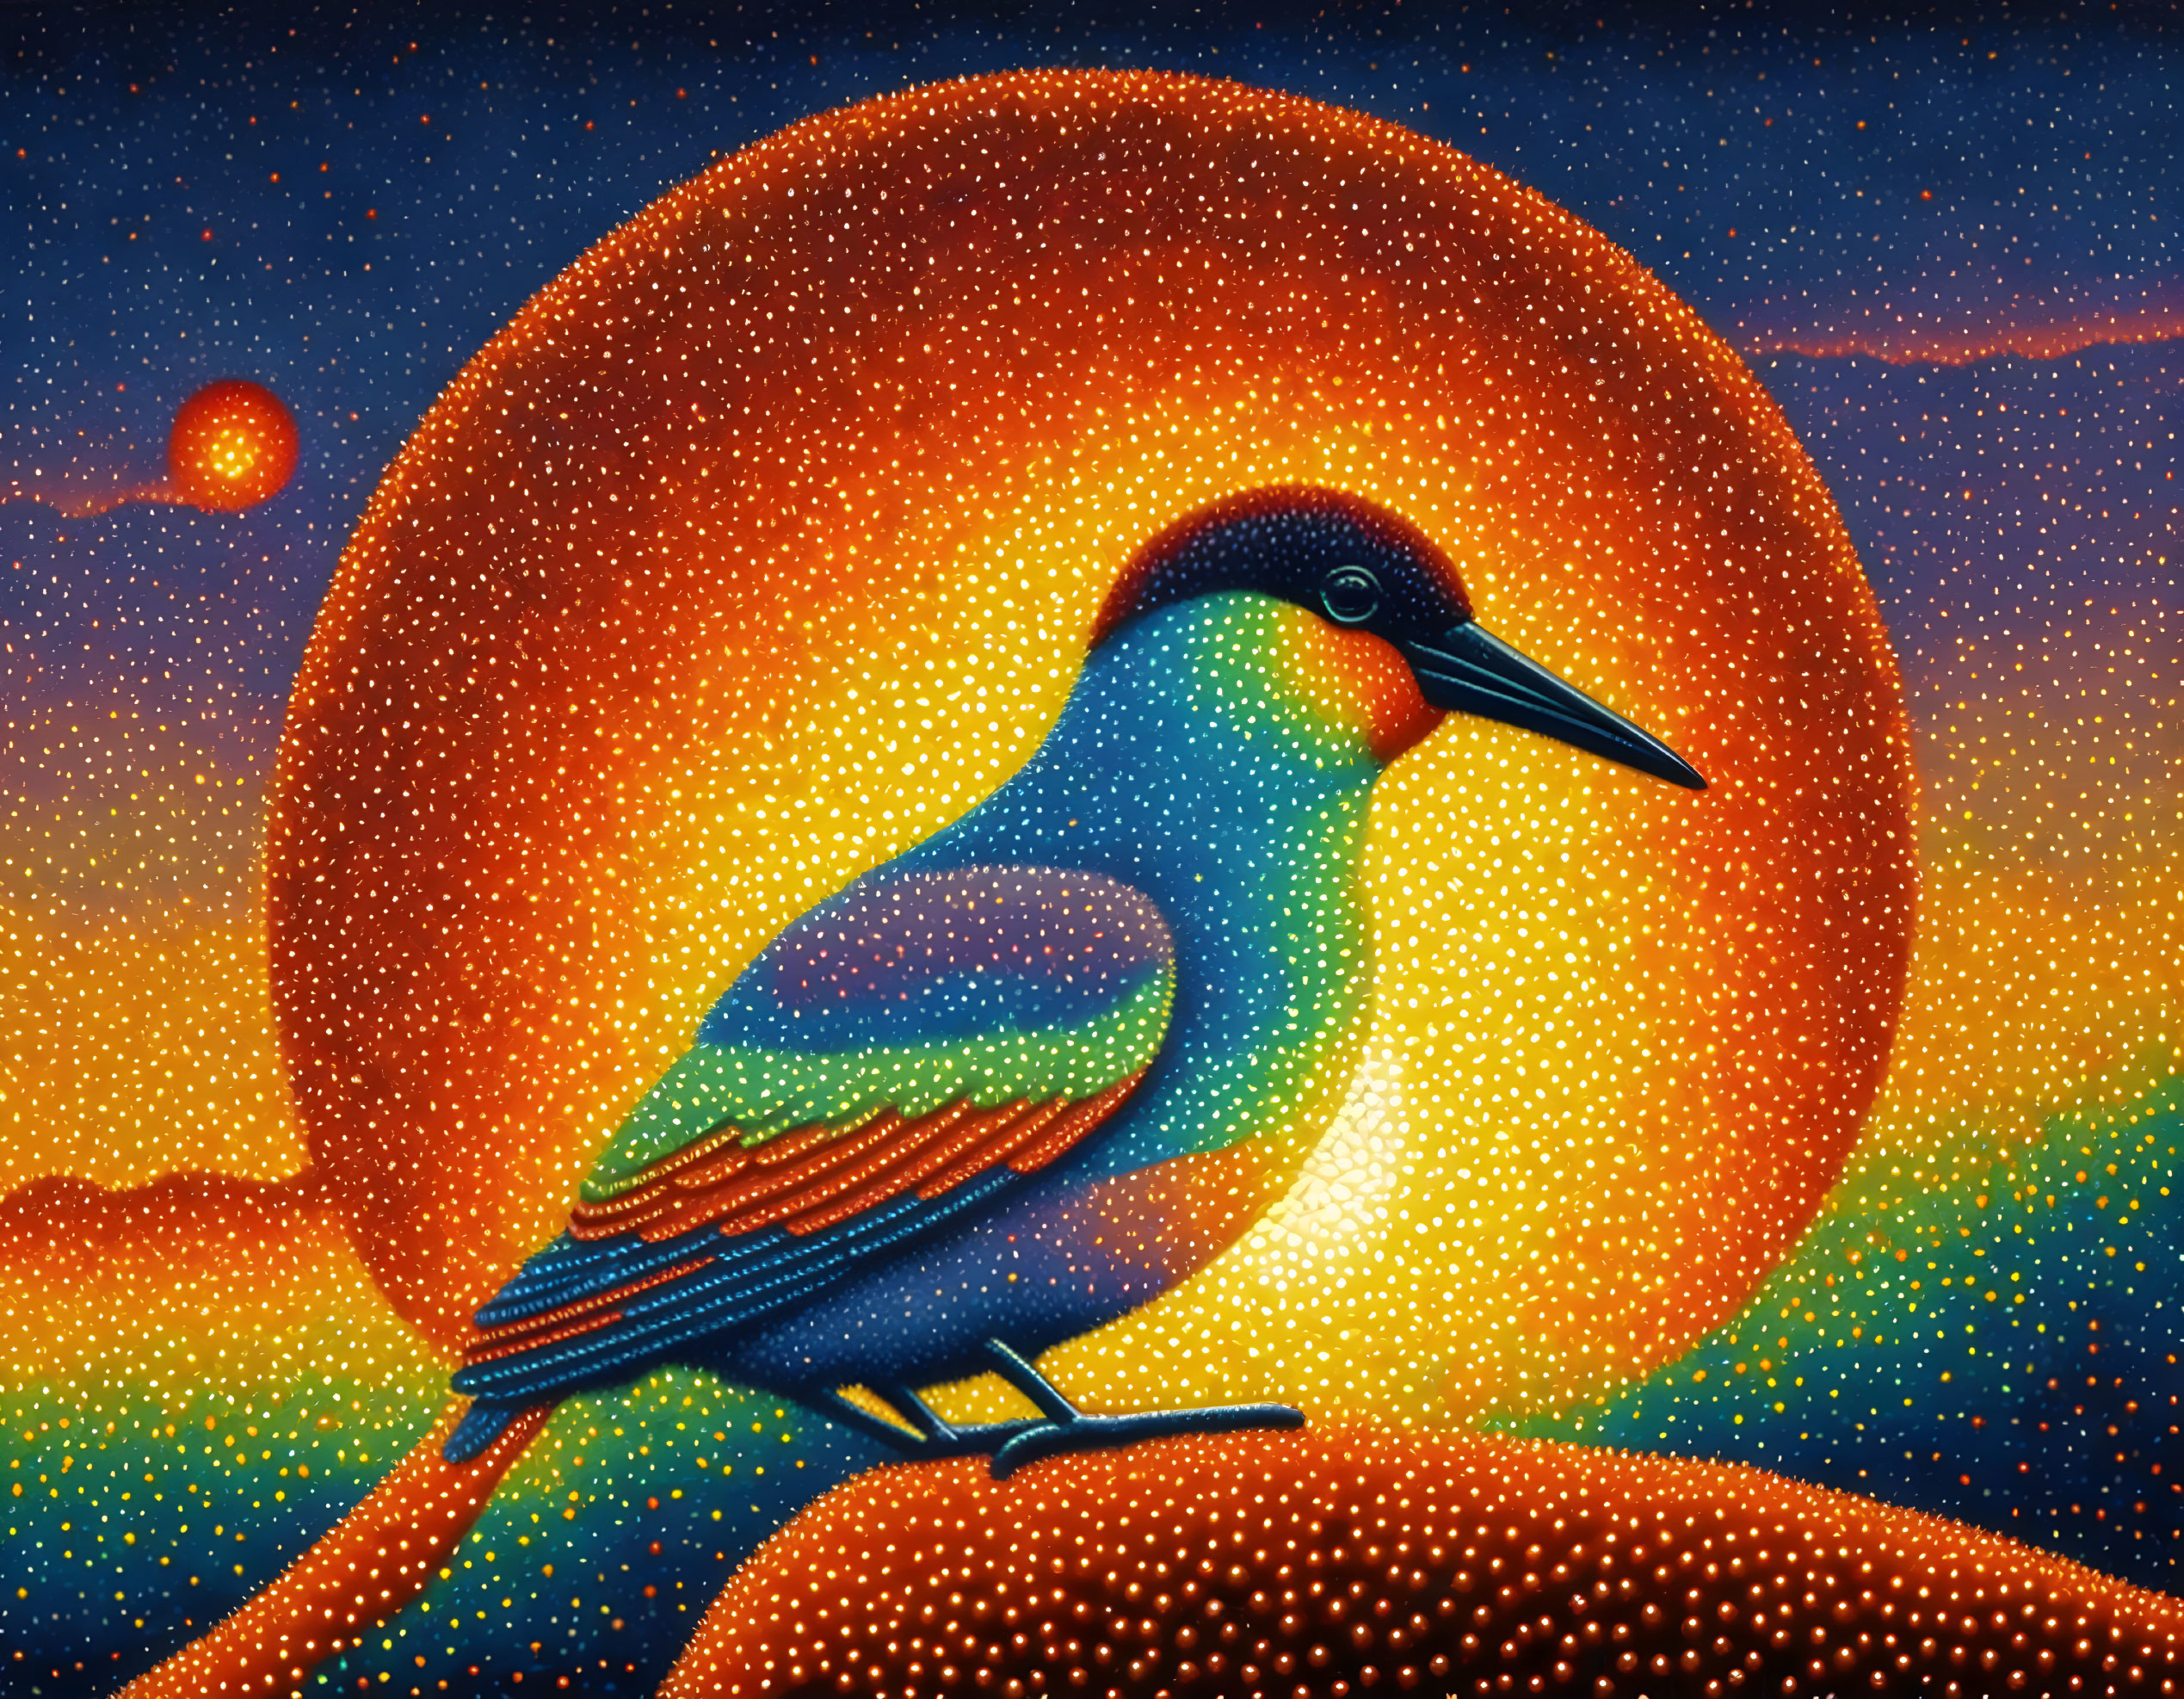 Colorful Bird Painting with Cosmic Background and Orange Moon